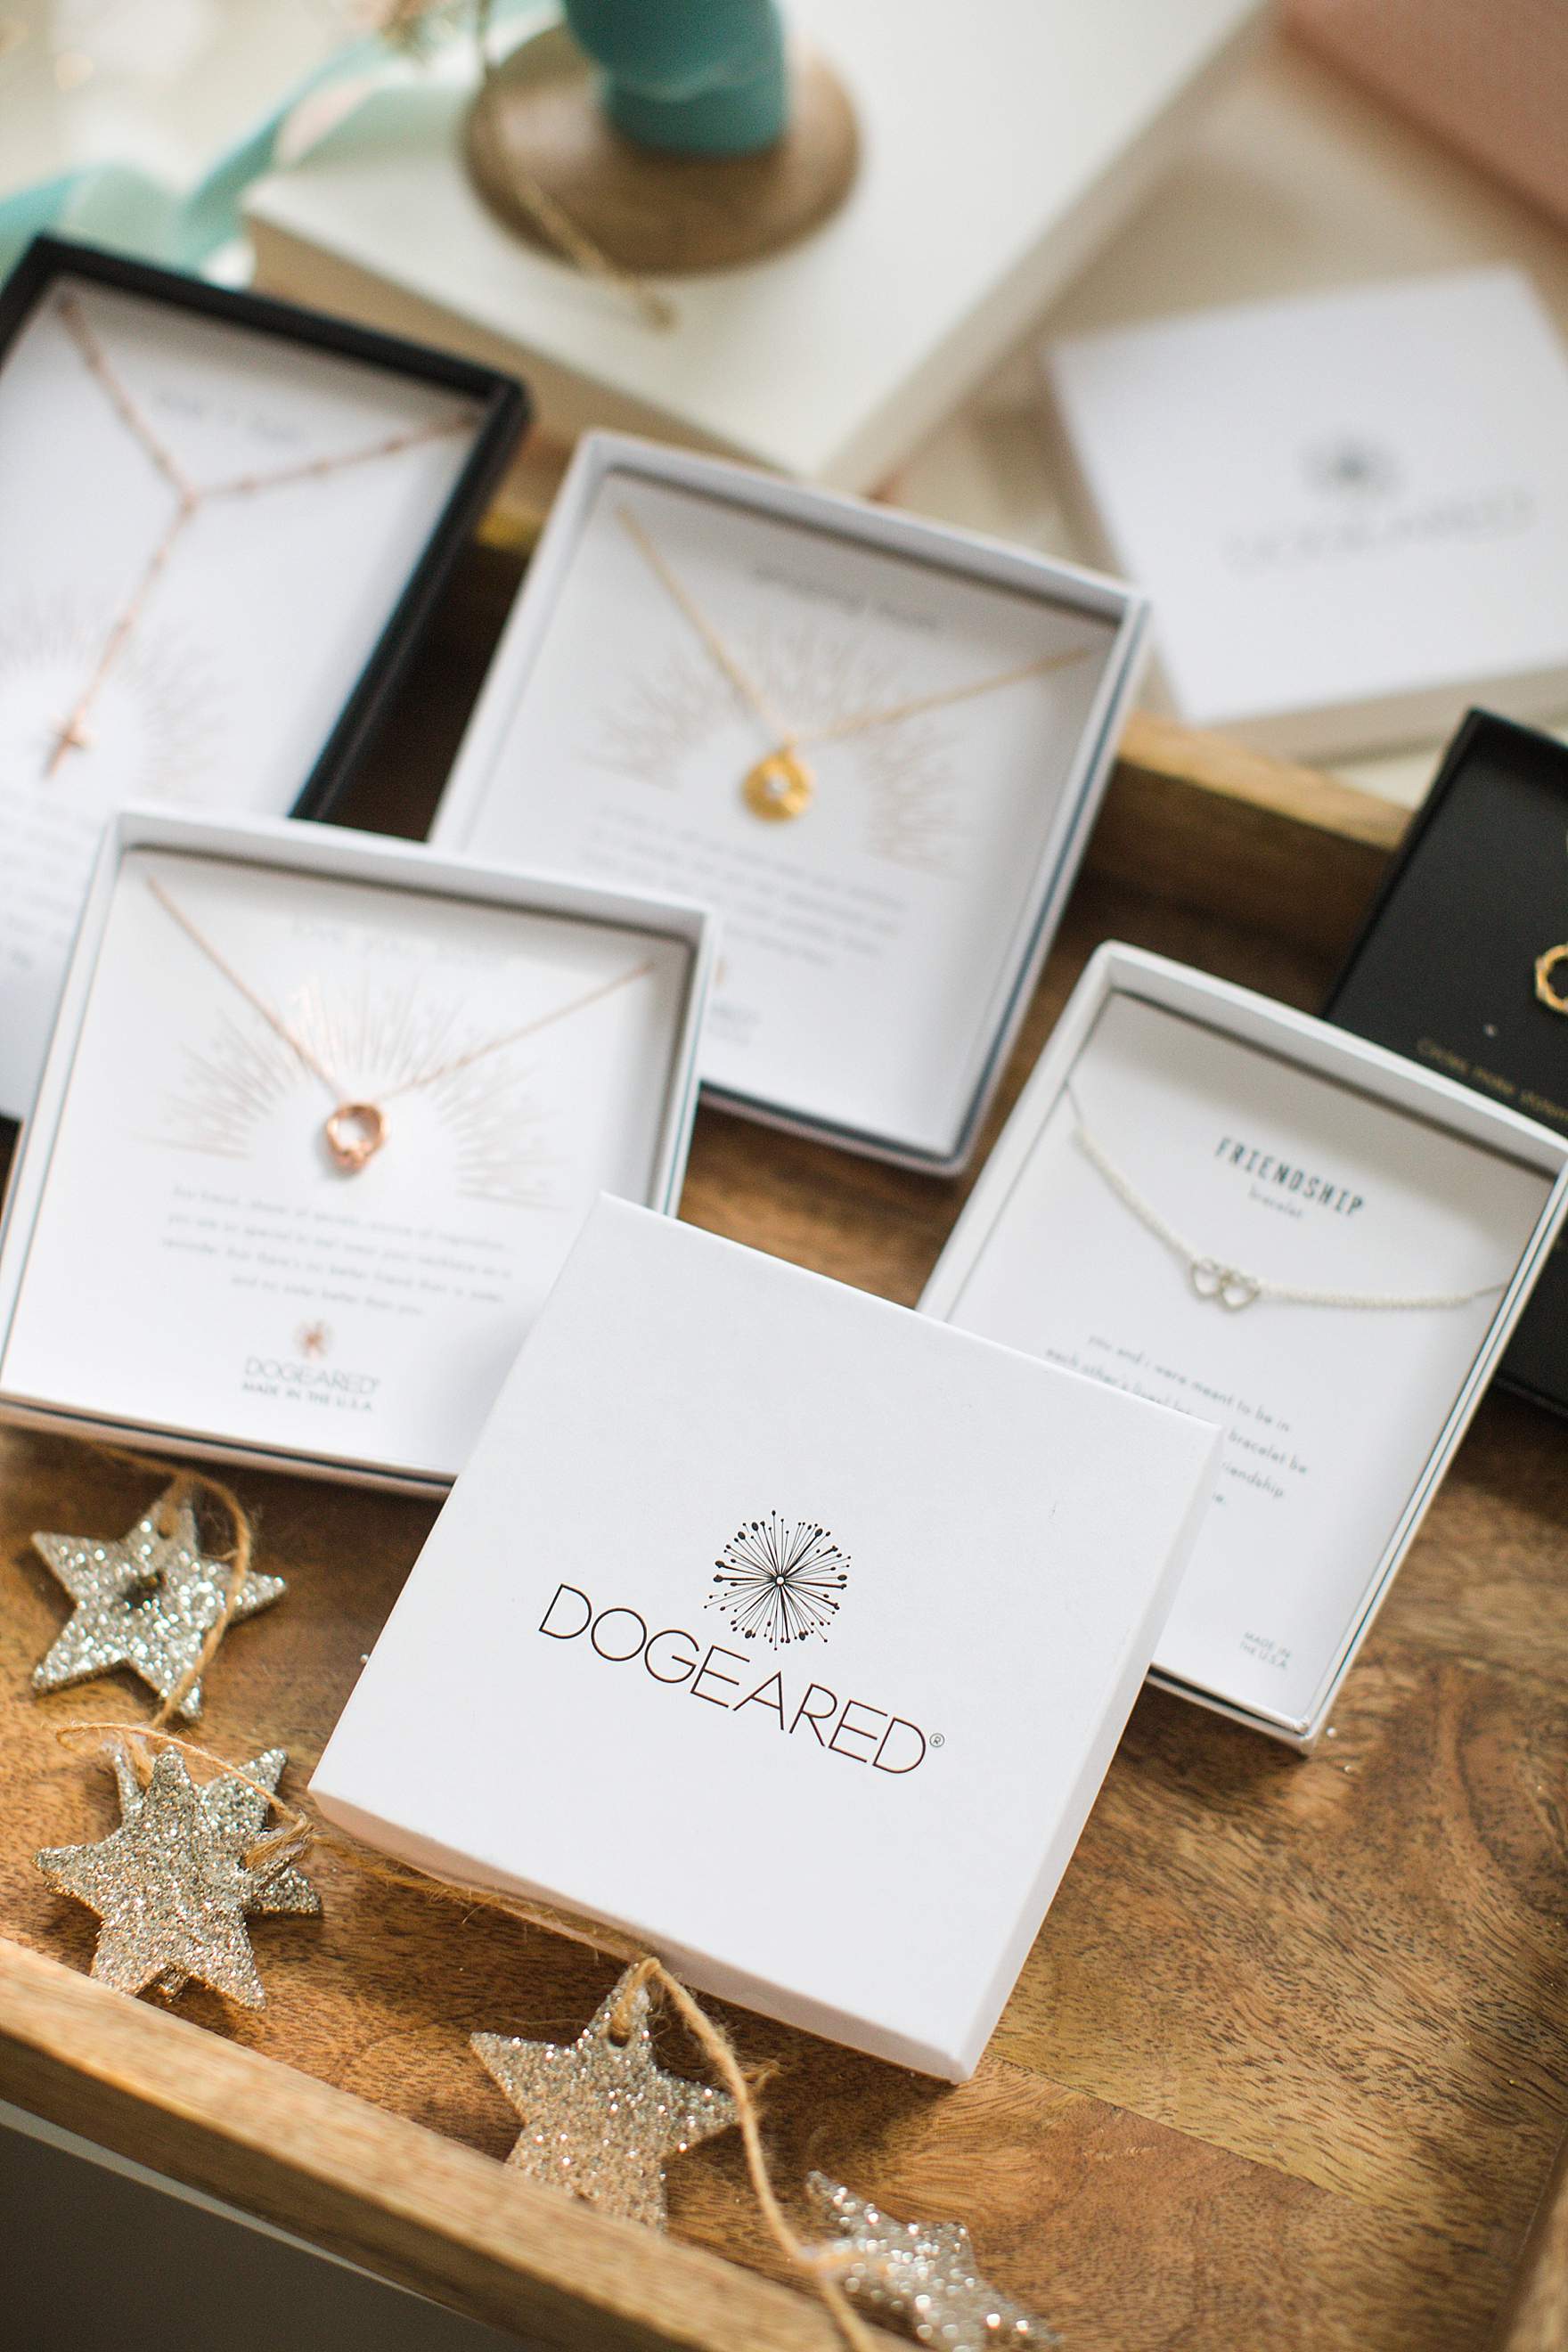 dainty necklaces gold, rose gold or silver plated by Dogeared good for holiday gifting for occasions and comes on a card that has an inspirational message